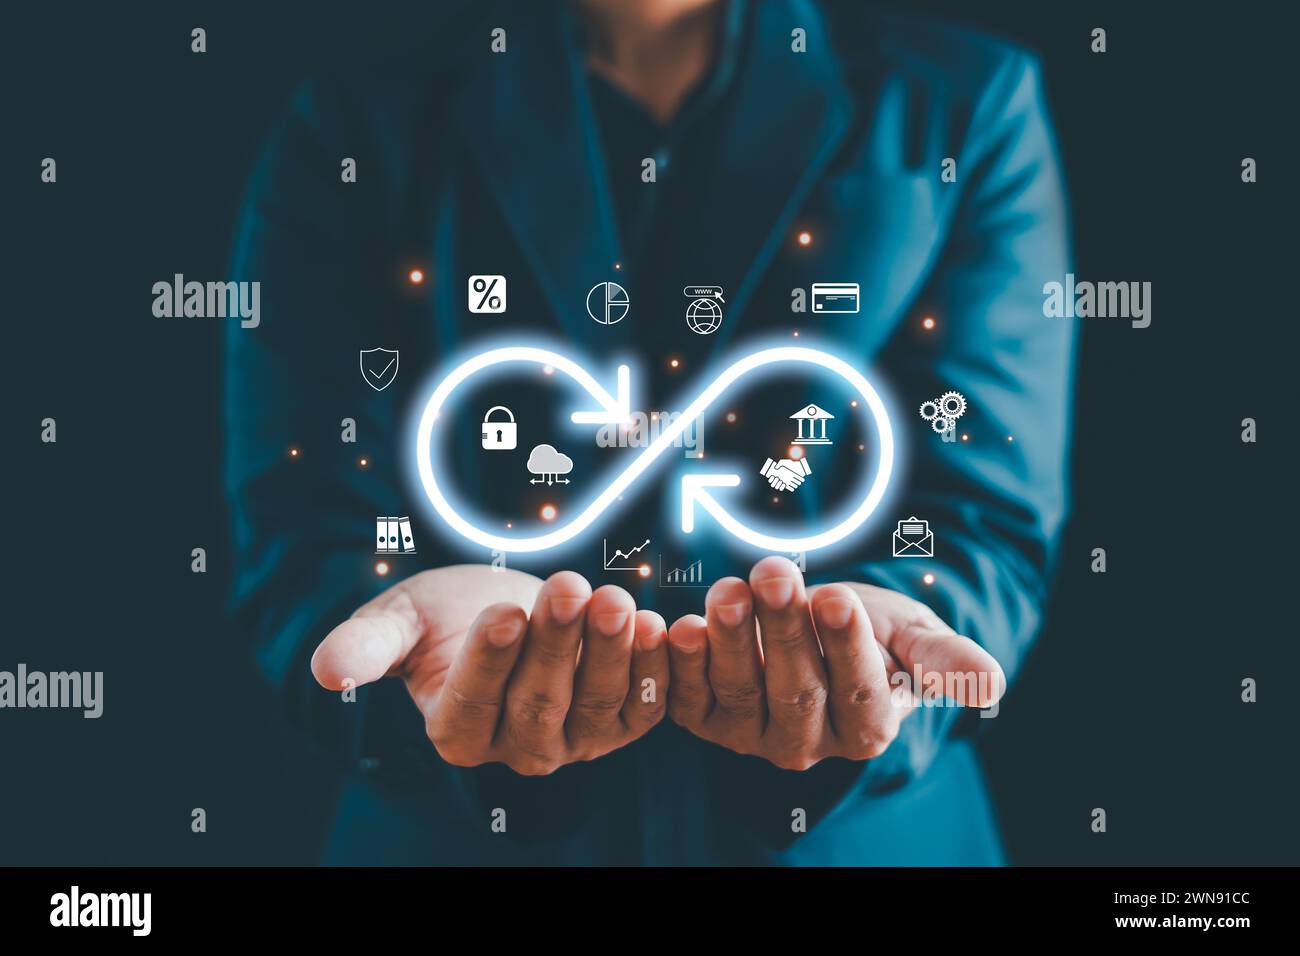 Businessman Hands holding virtual infinity with technology marketing online icon, a symbol of connection to community metaverse world network system a Stock Photo